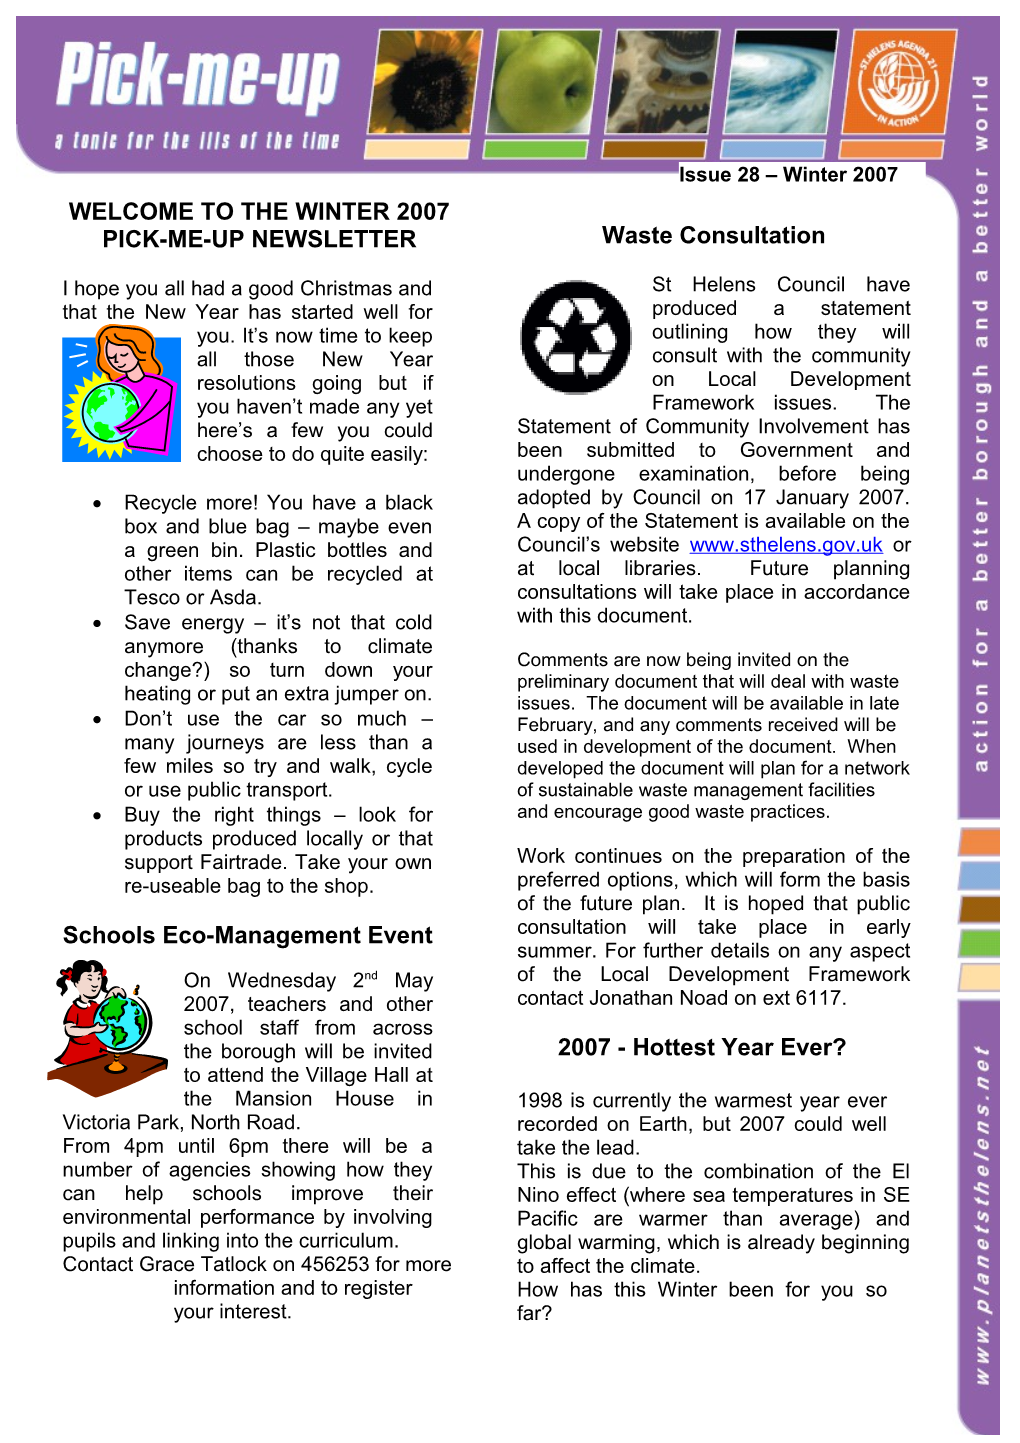 Welcome to the Spring 2006 Pick-Me-Up Newsletter